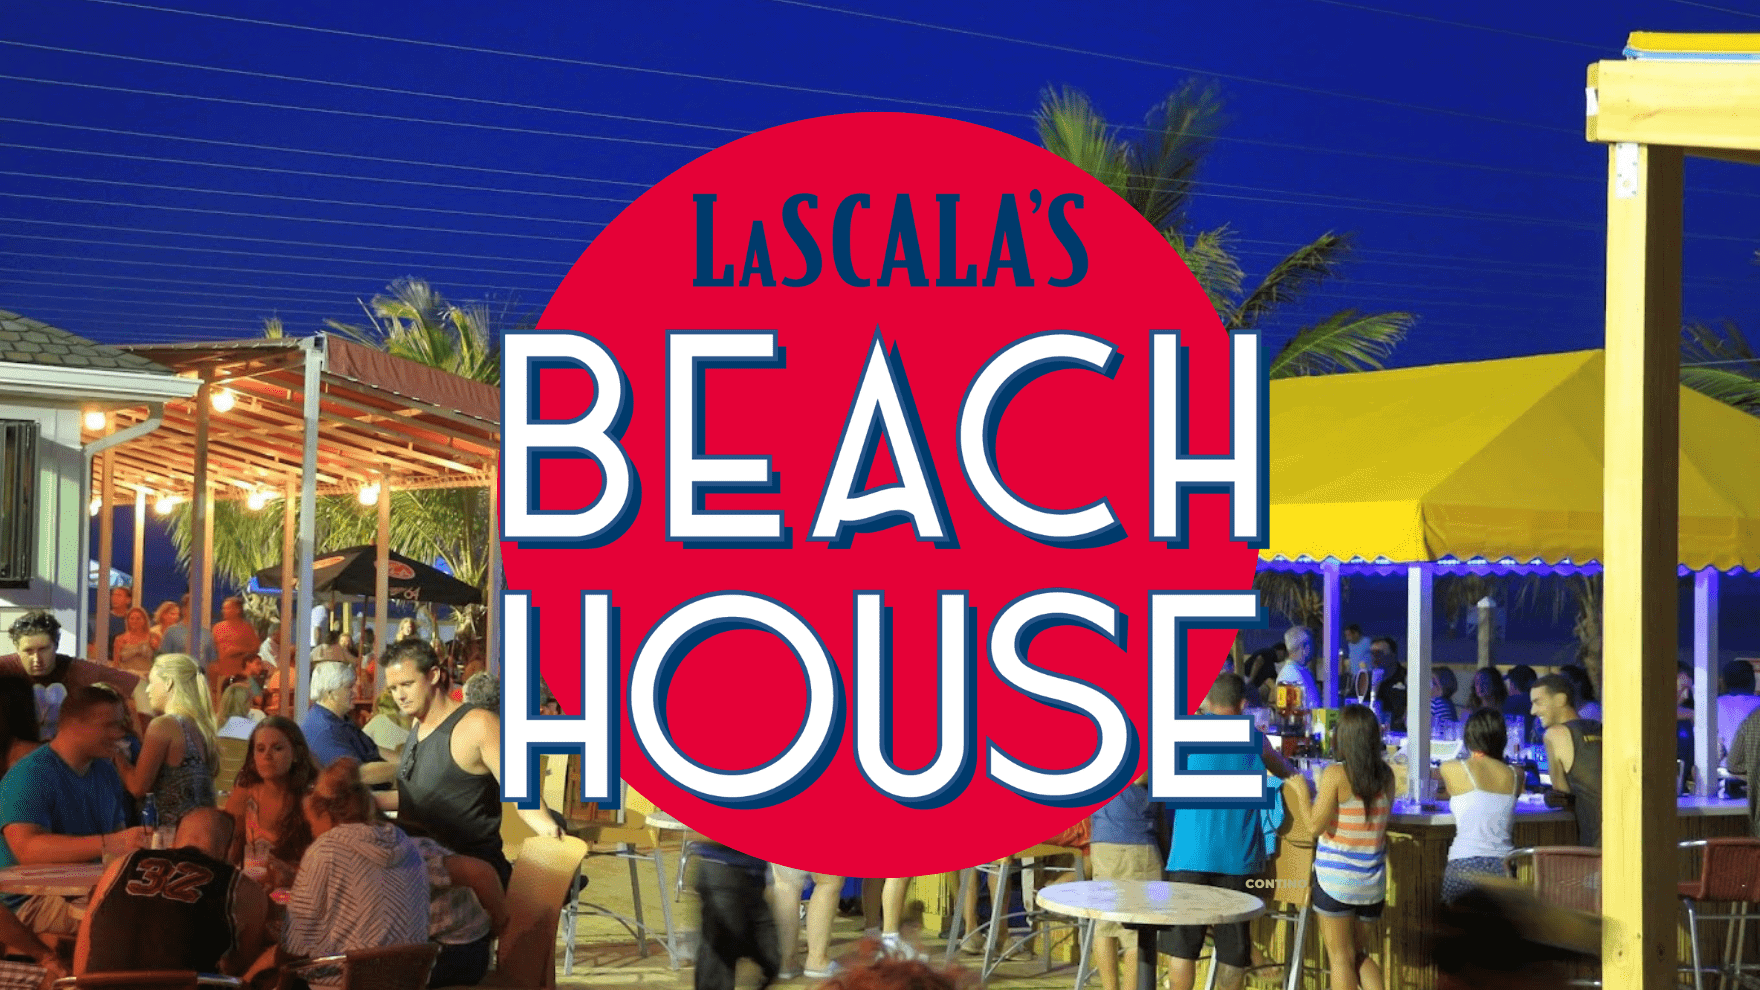 LaScala’s Beach House To Open This Week